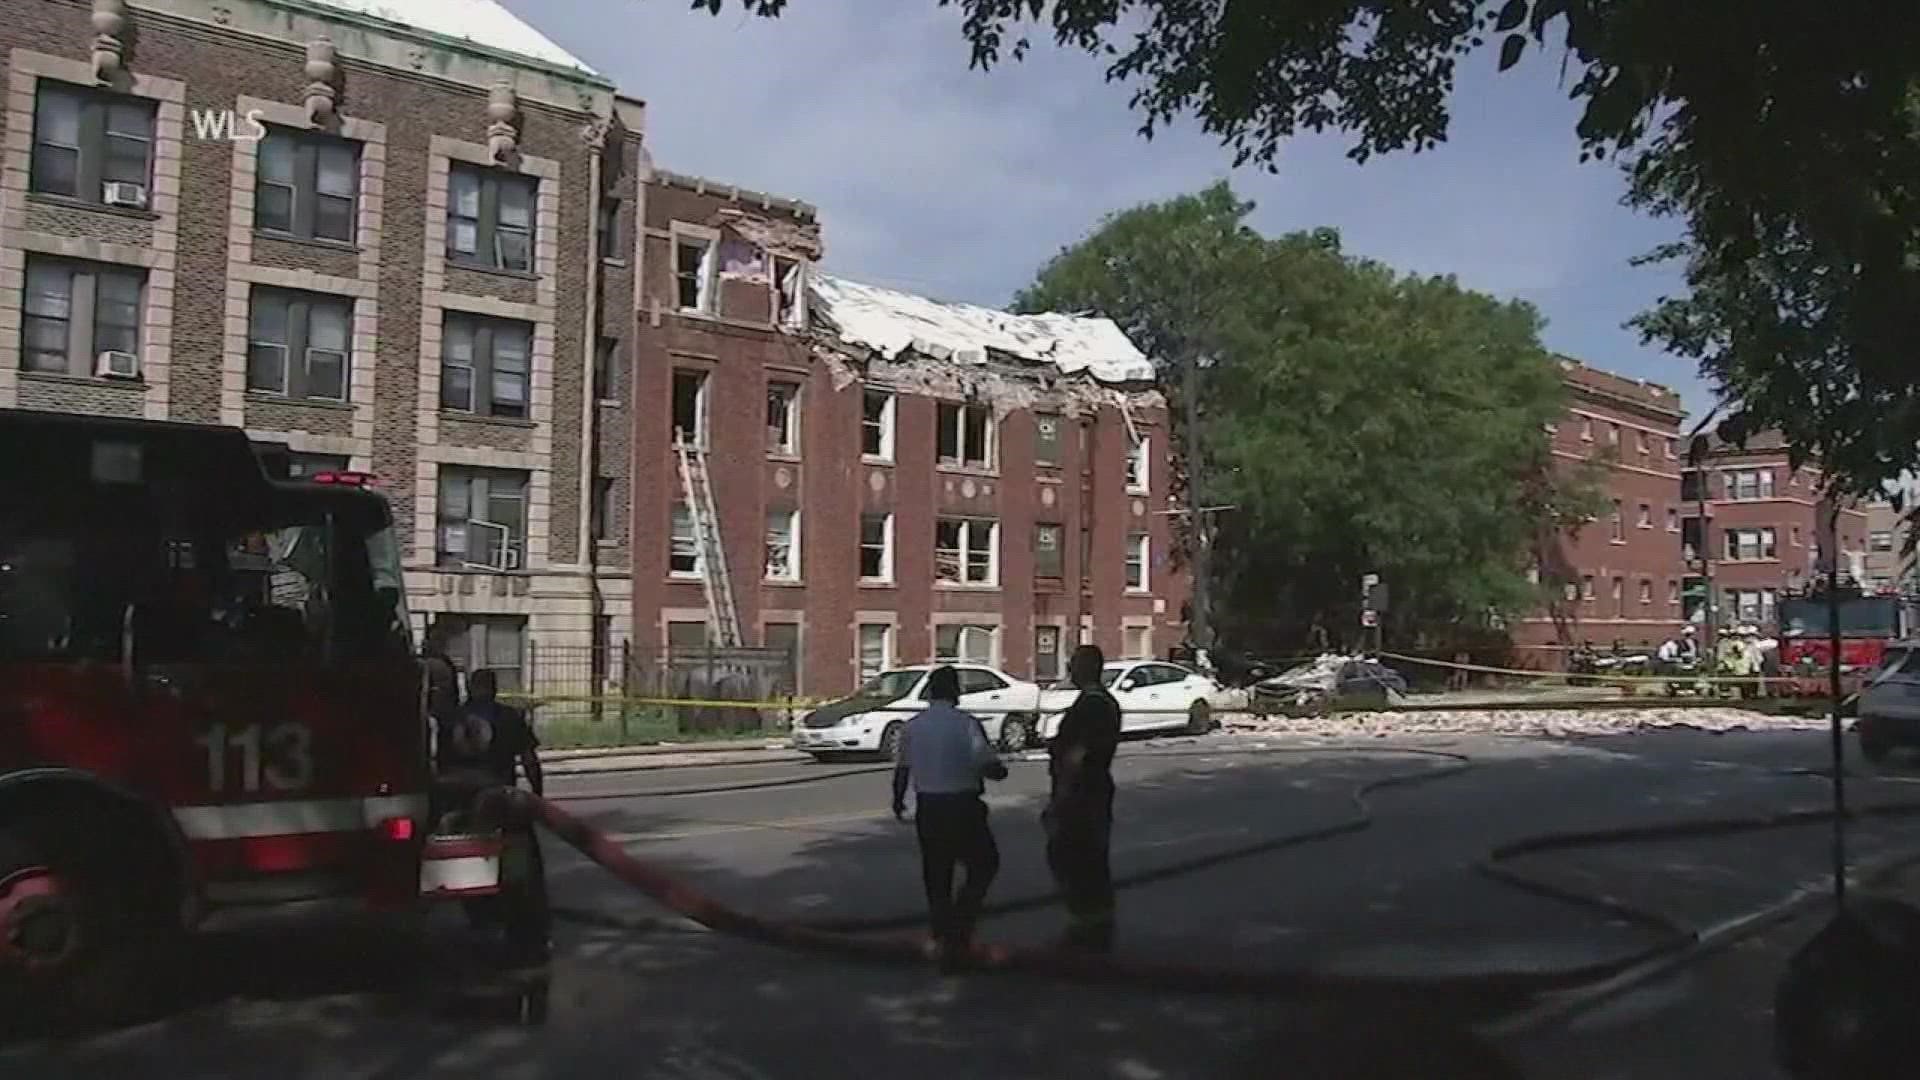 Eight people were rushed to hospitals after being injured when an explosion Tuesday tore through the top floor of a Chicago apartment building, officials said.